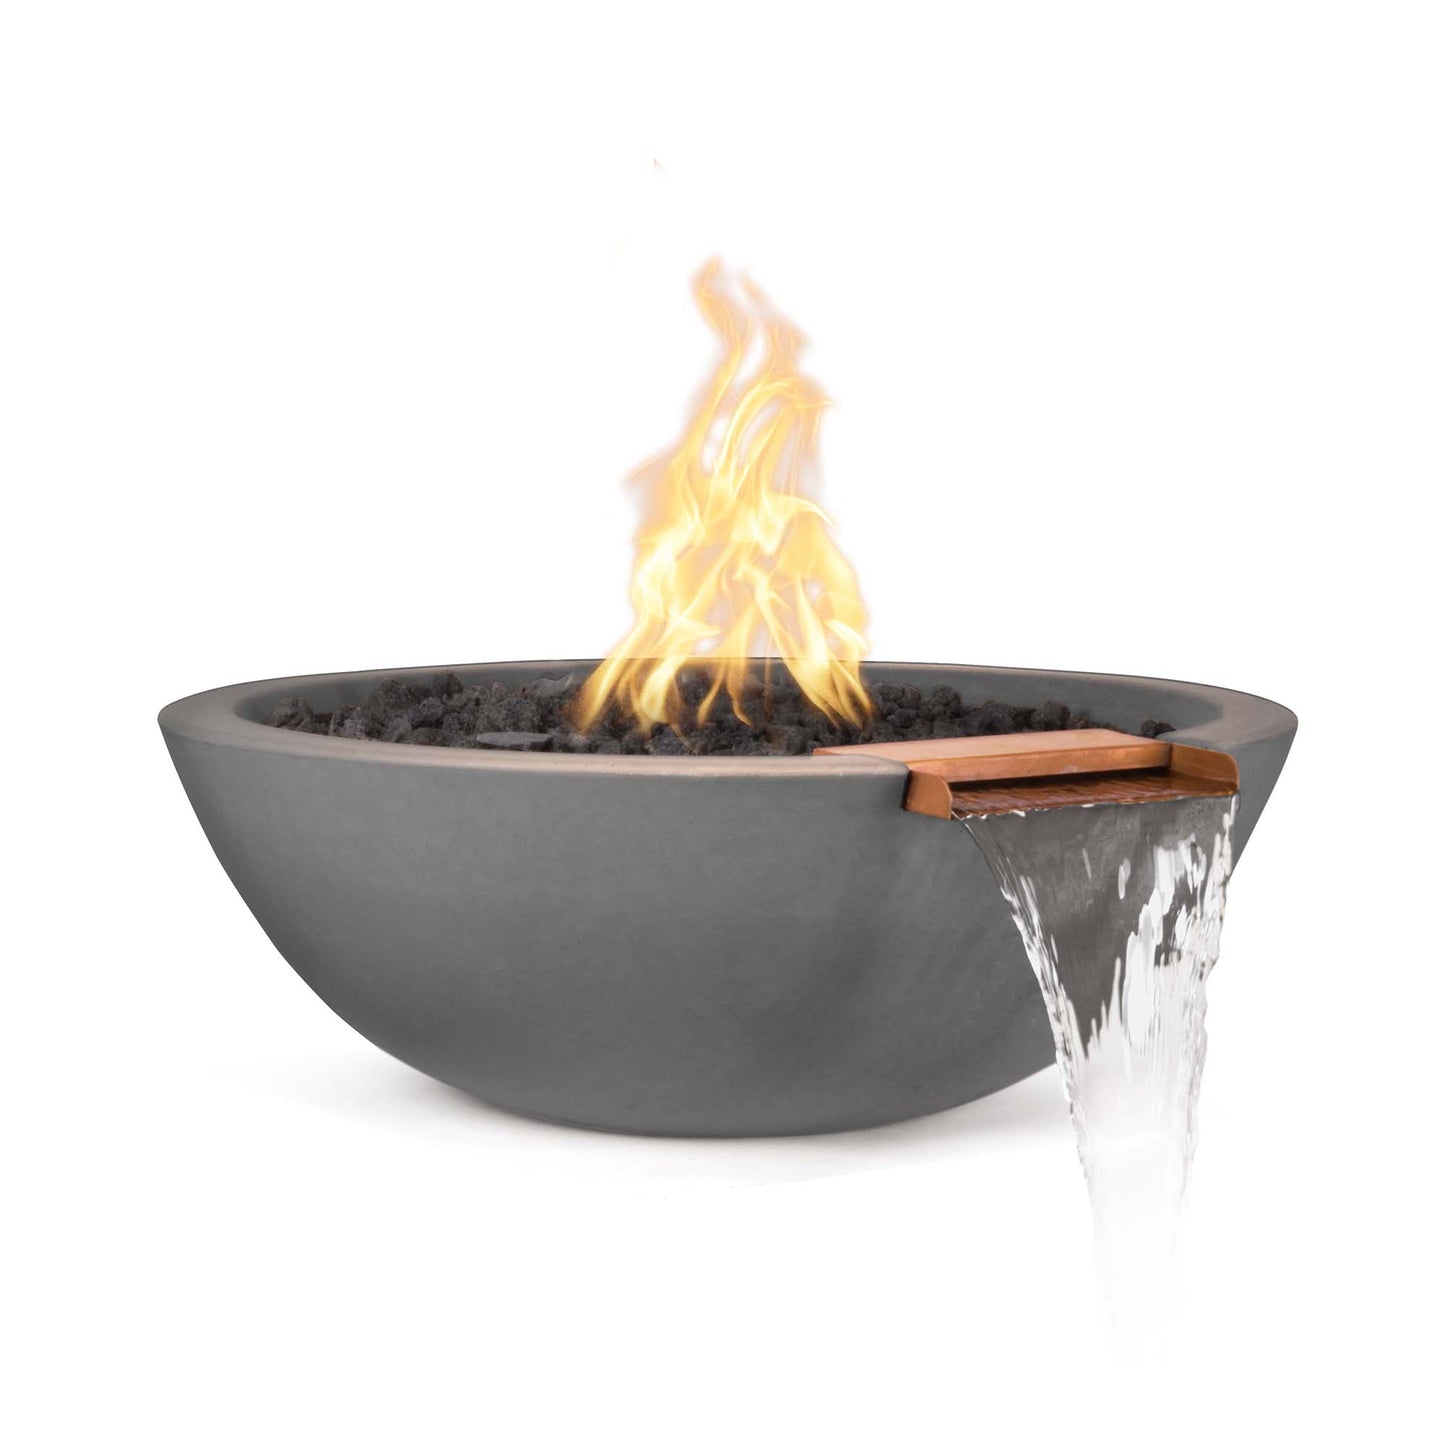 The Outdoor Plus Round Sedona 27" Ash GFRC Concrete Liquid Propane Fire & Water Bowl with Match Lit with Flame Sense Ignition